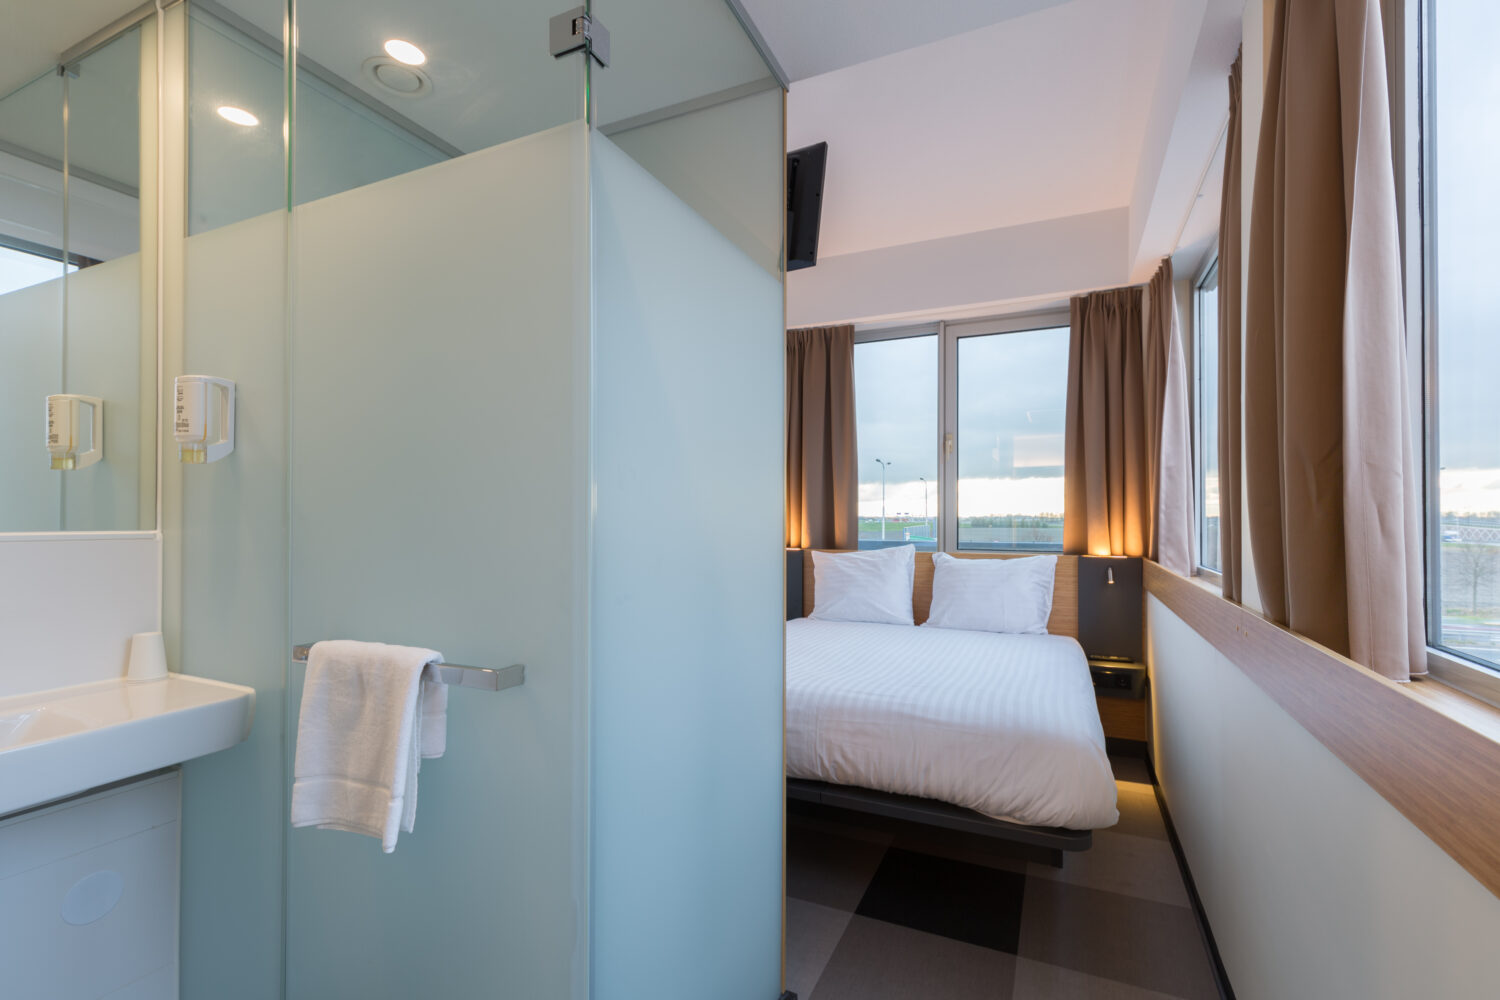 Double room with view over the city, built-in shower and a sink